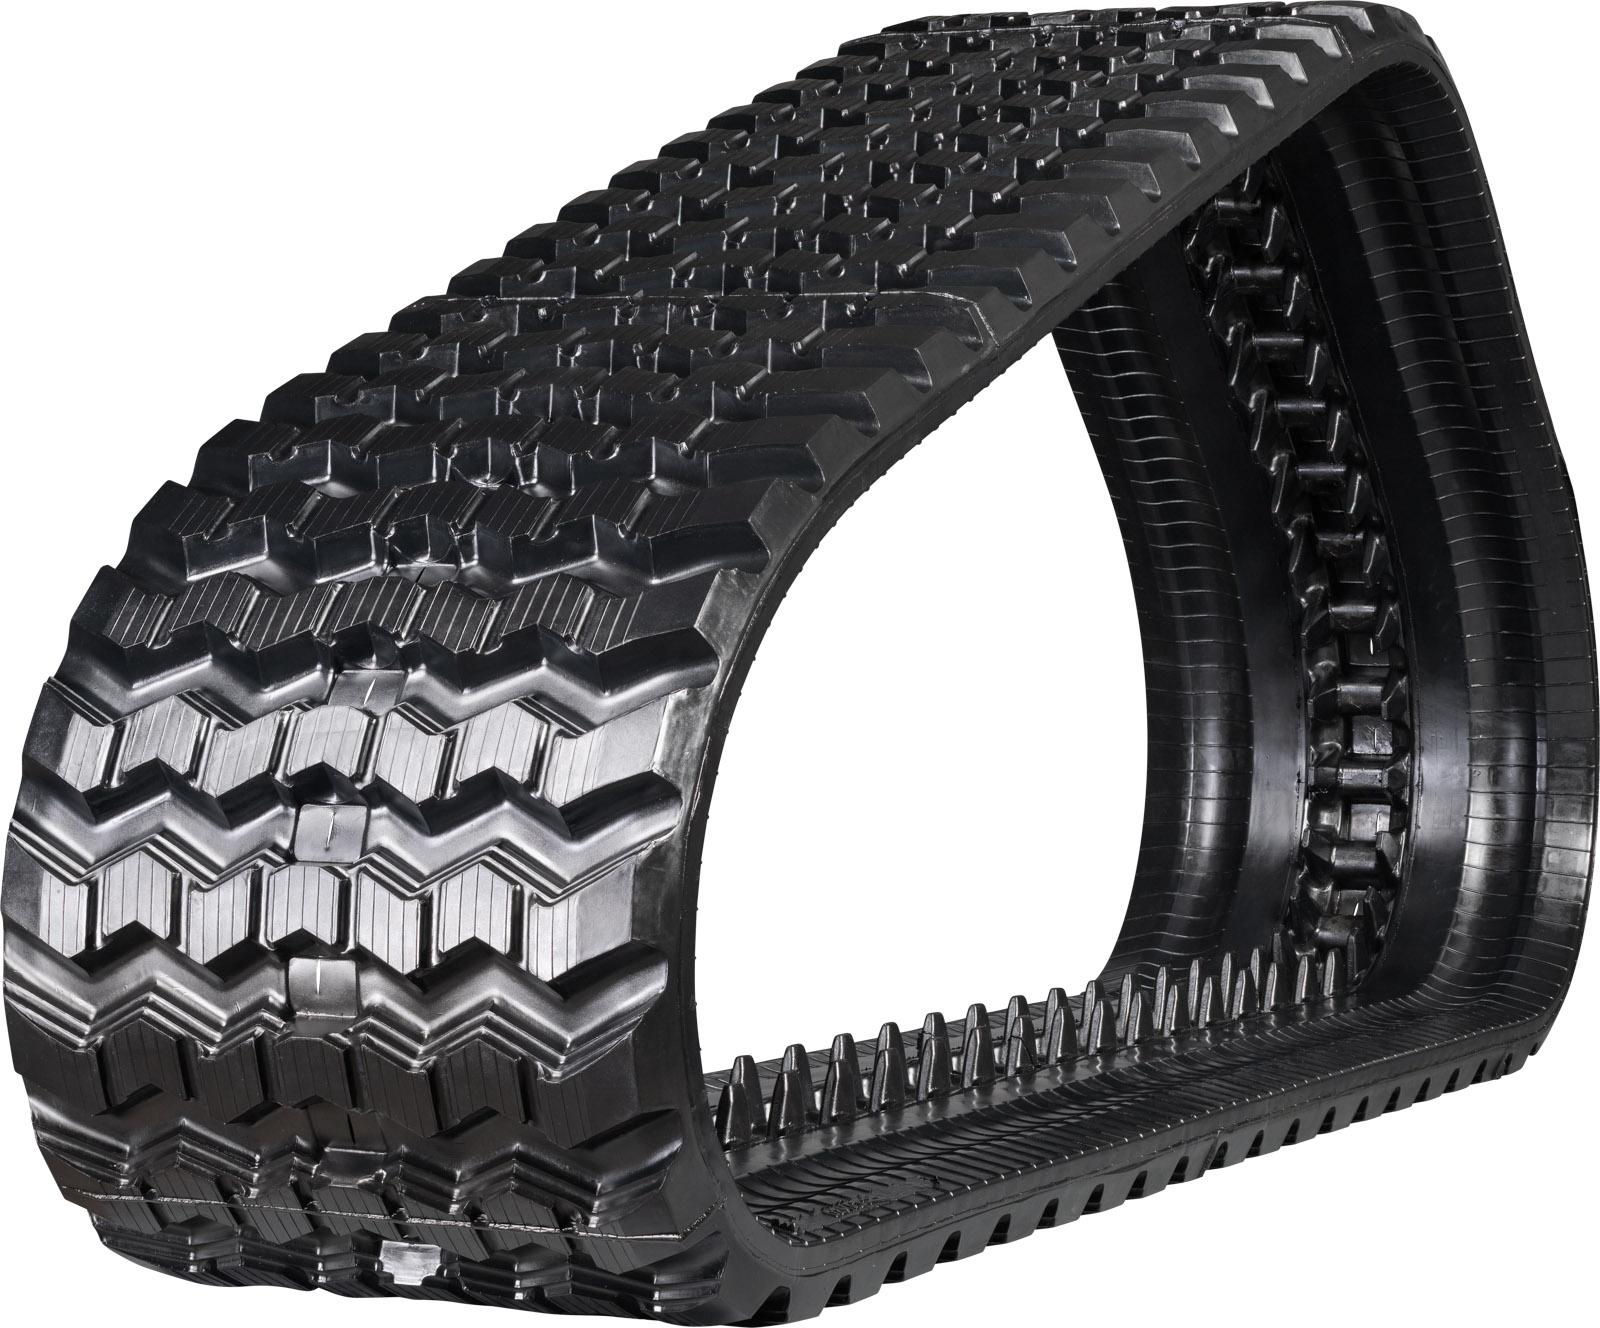 set of 2 16" camso heavy duty sawtooth pattern rubber track (400x86bx53)